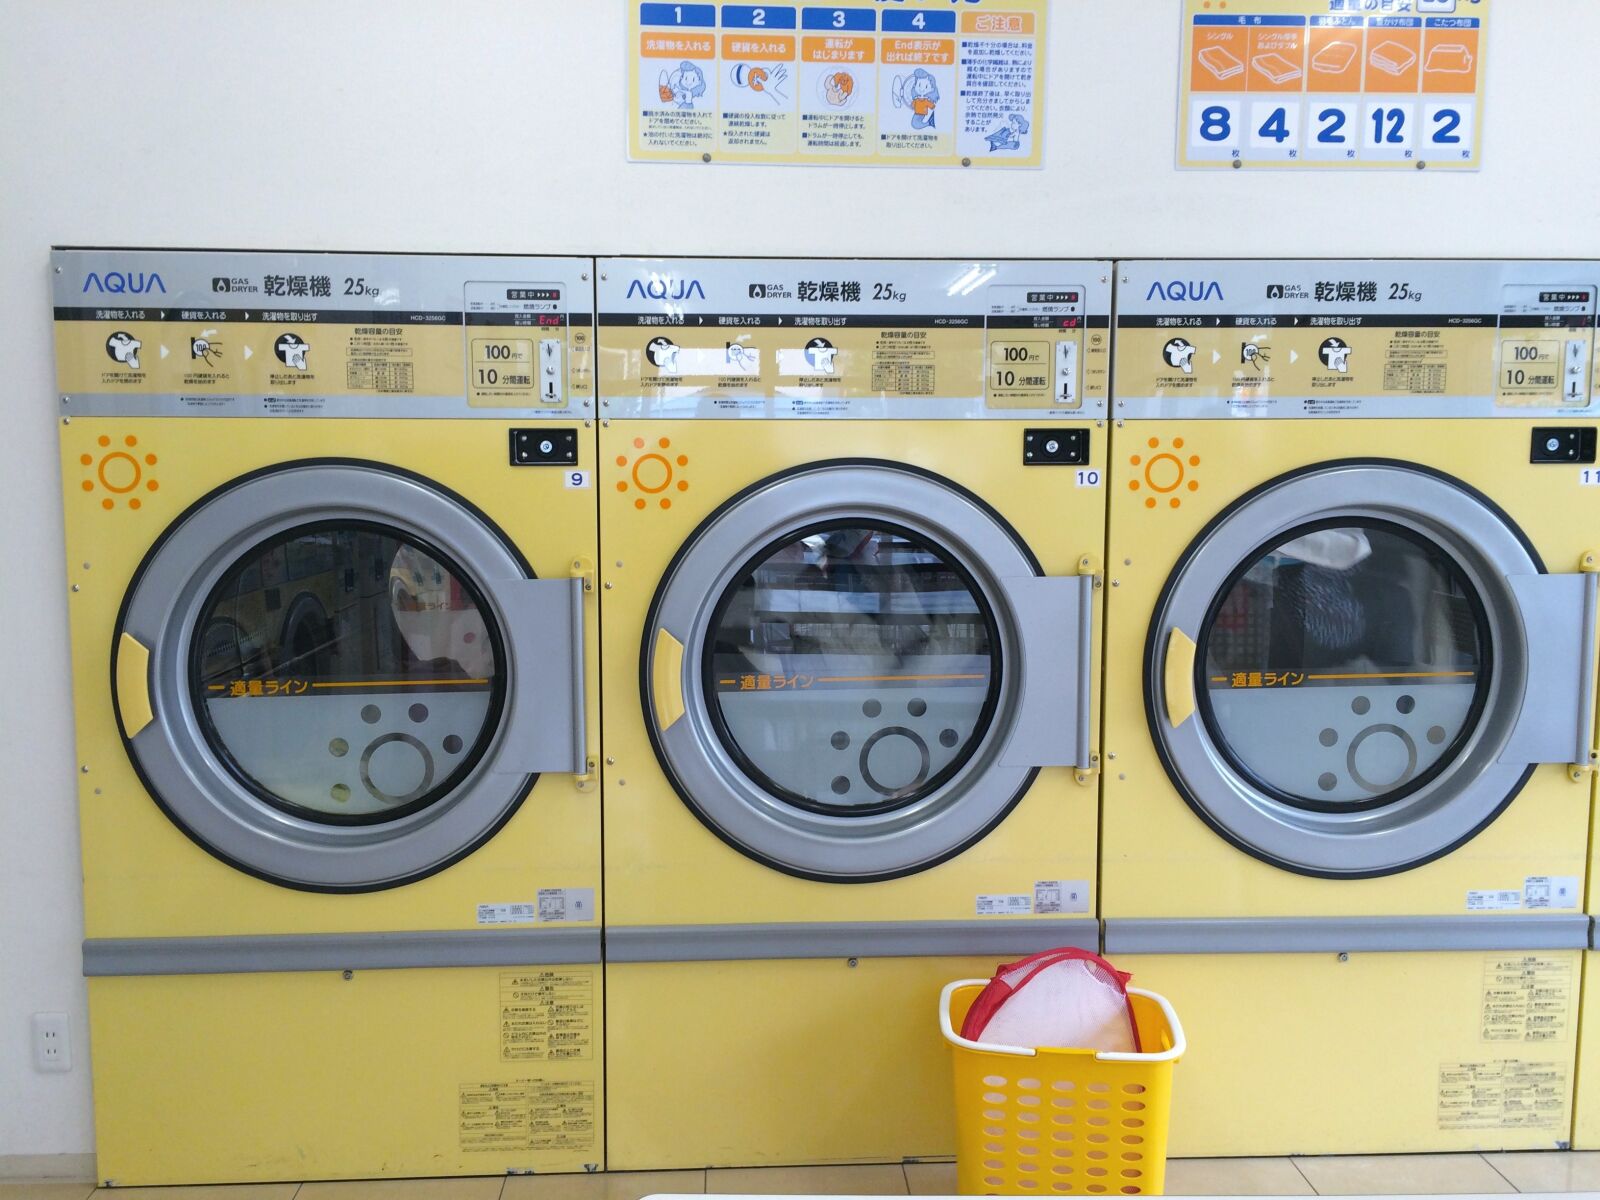 Apple iPhone 5s sample photo. Launderette, dryer, machinery photography